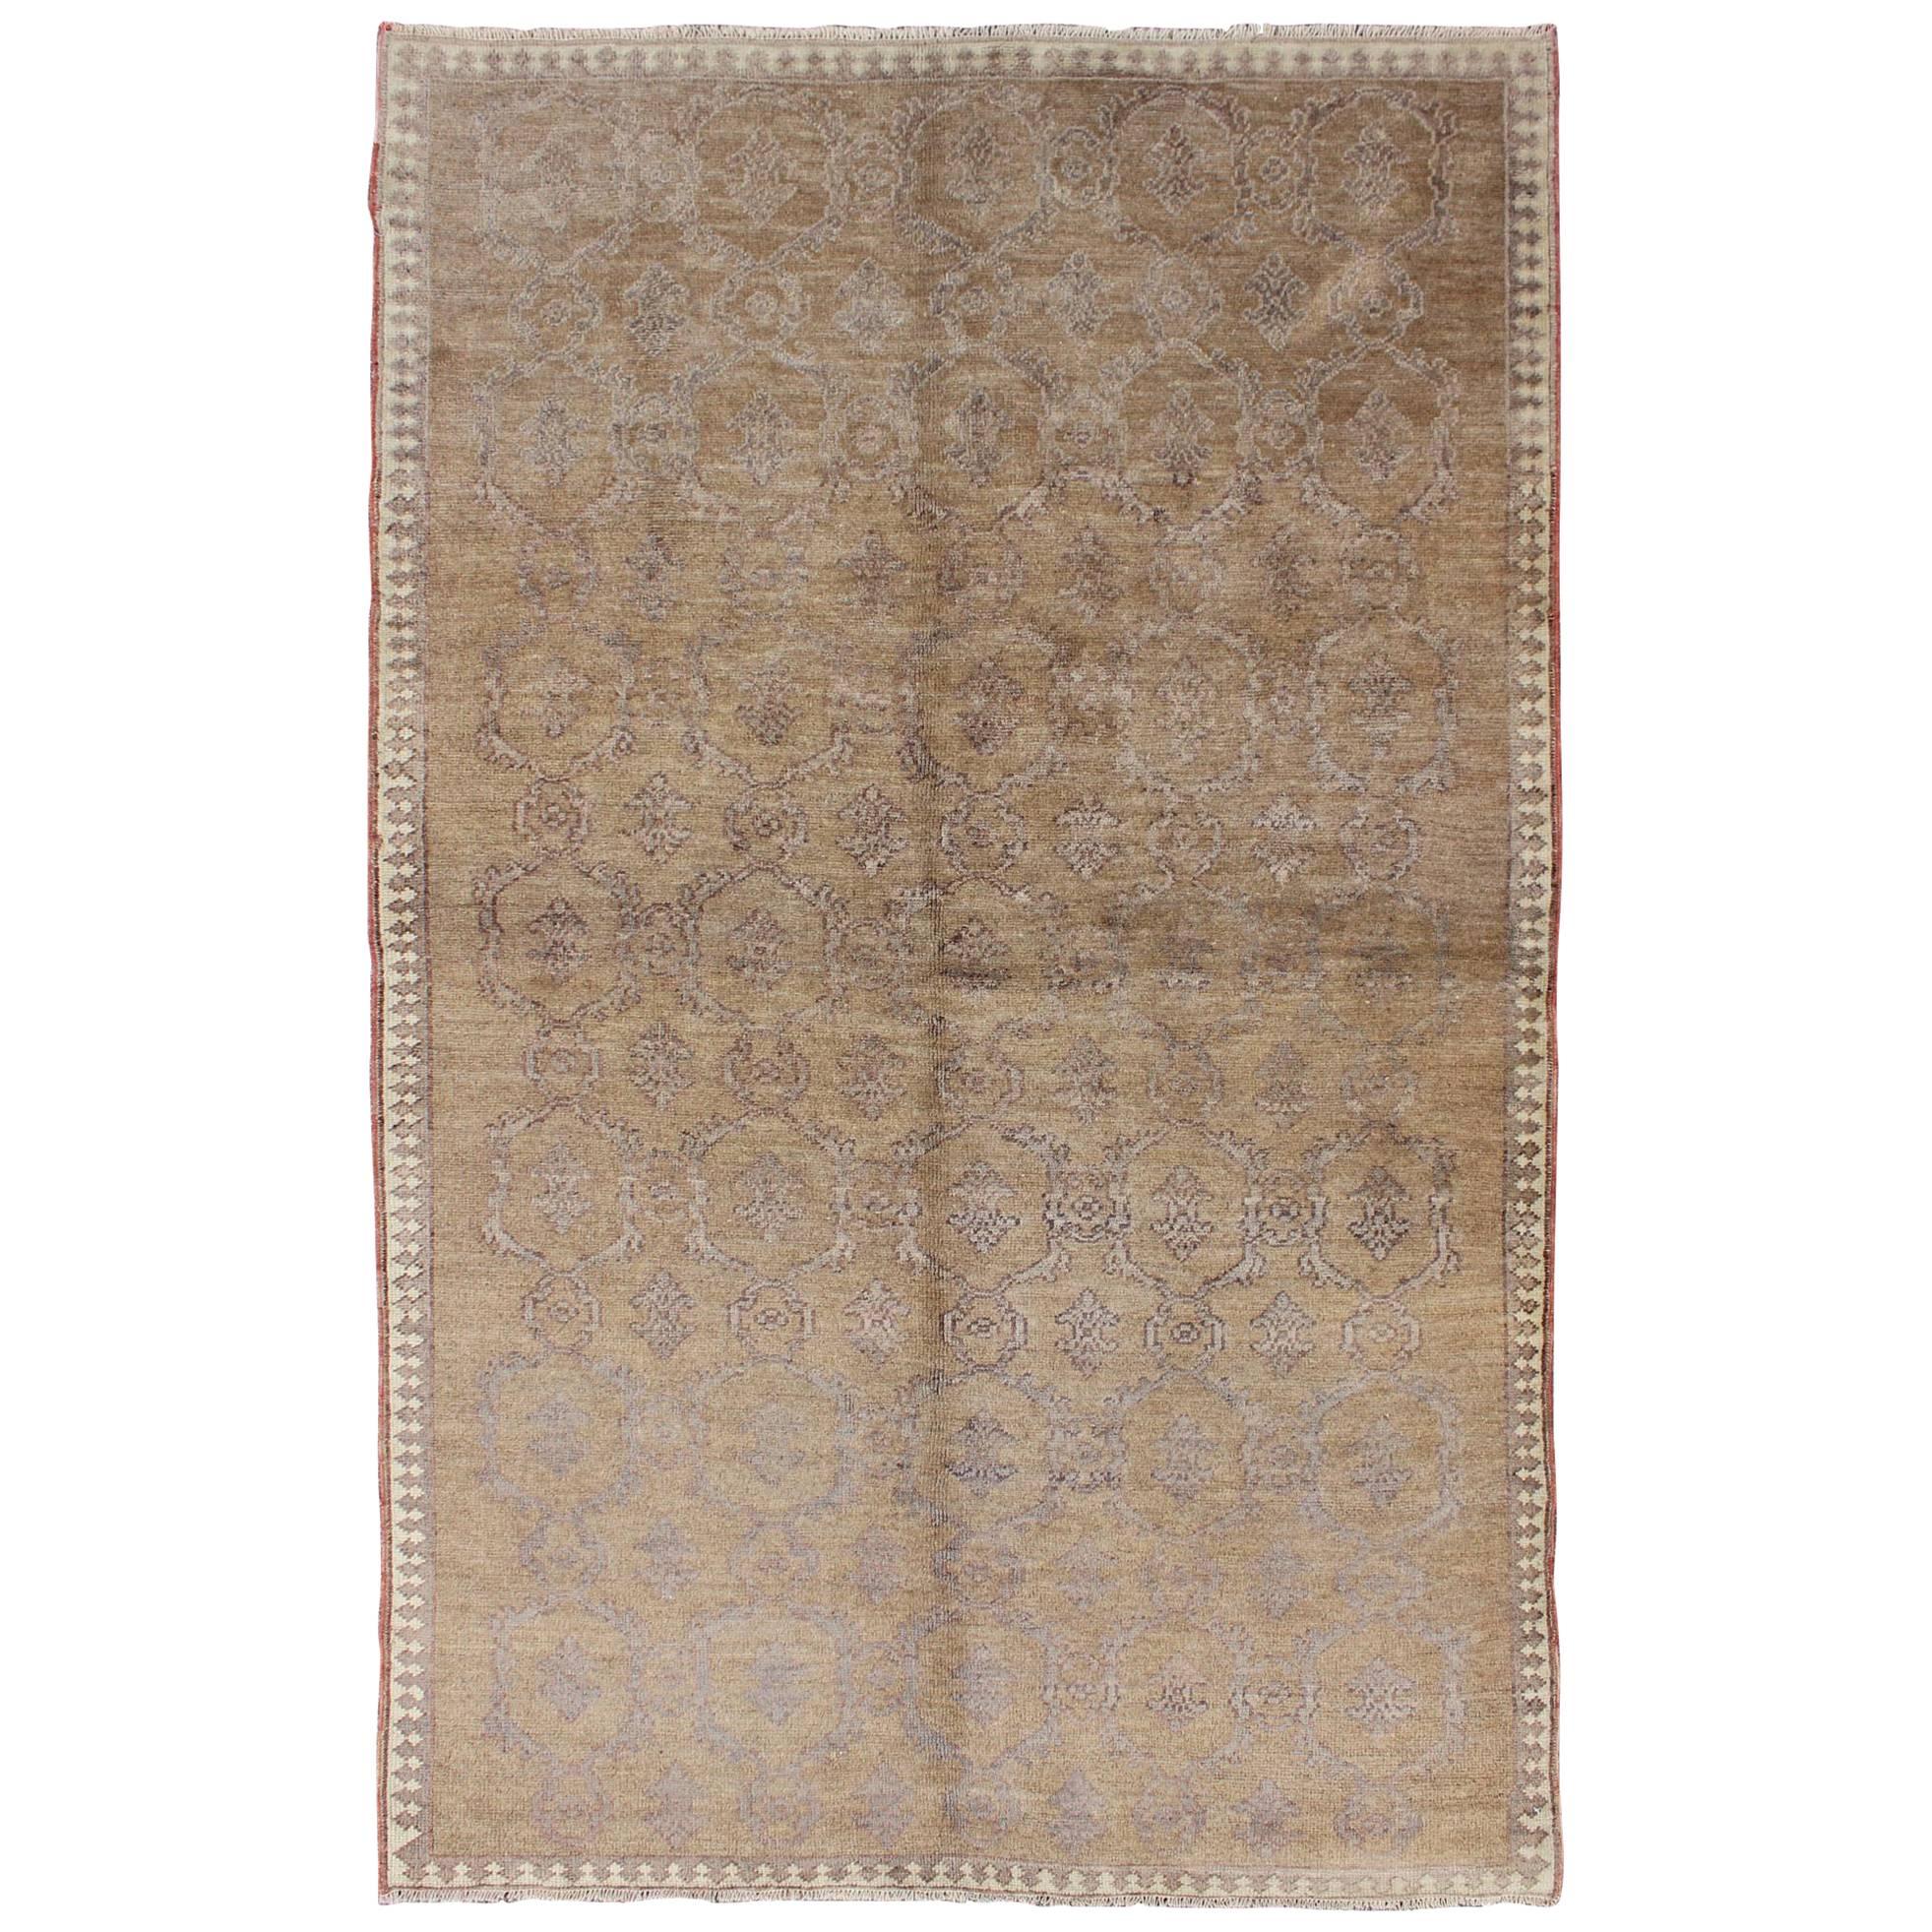 Latticework Double Arrow-Head Design Vintage Turkish Tulu Rug in Taupe and Gray For Sale